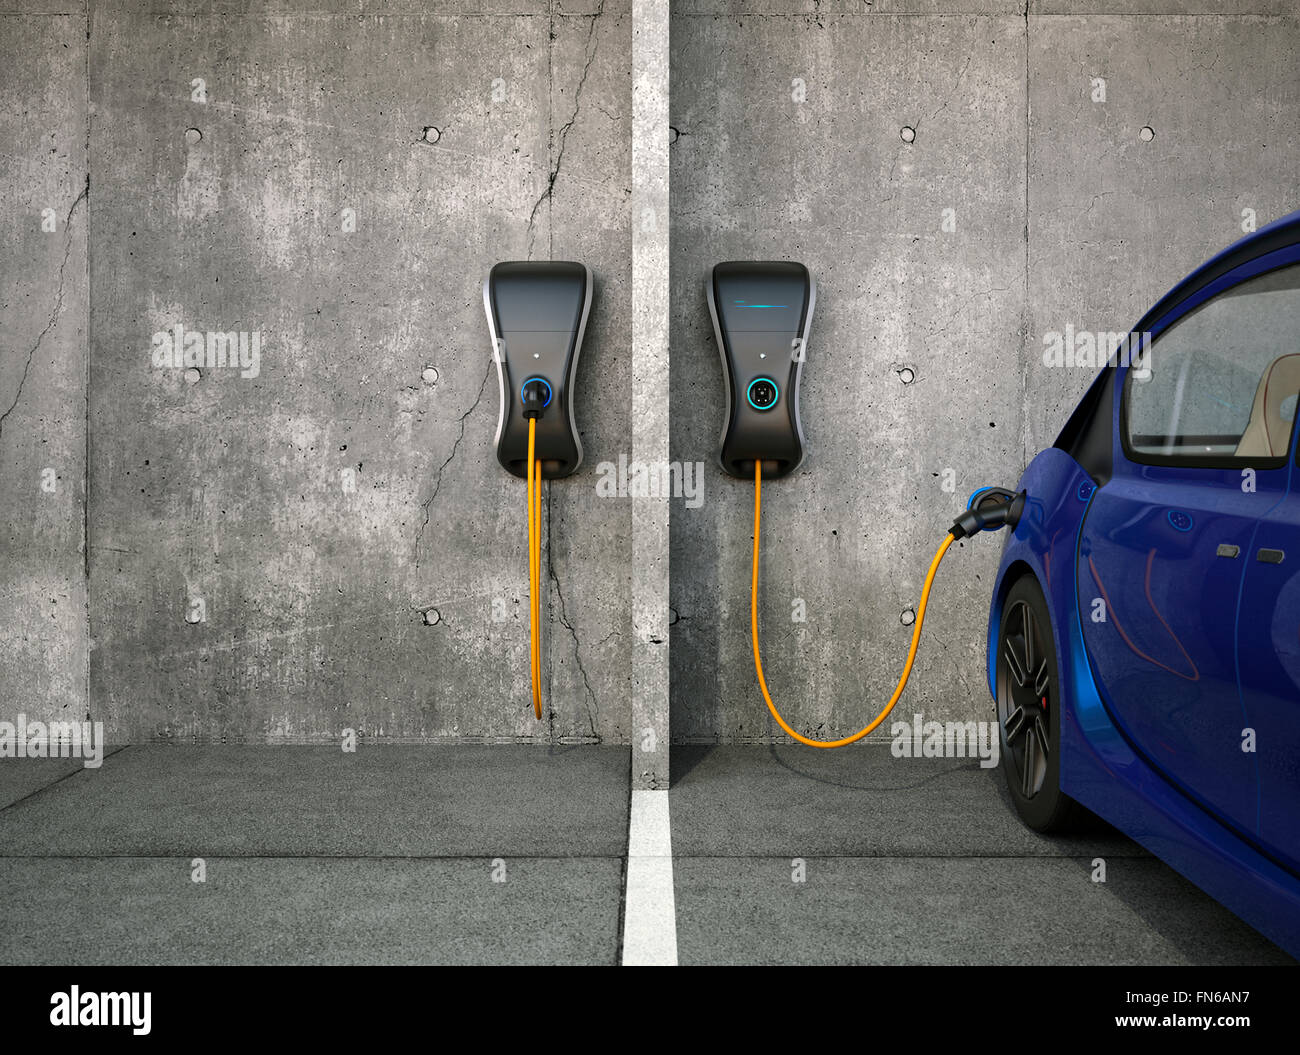 Electric vehicle charging station for home. Stock Photo